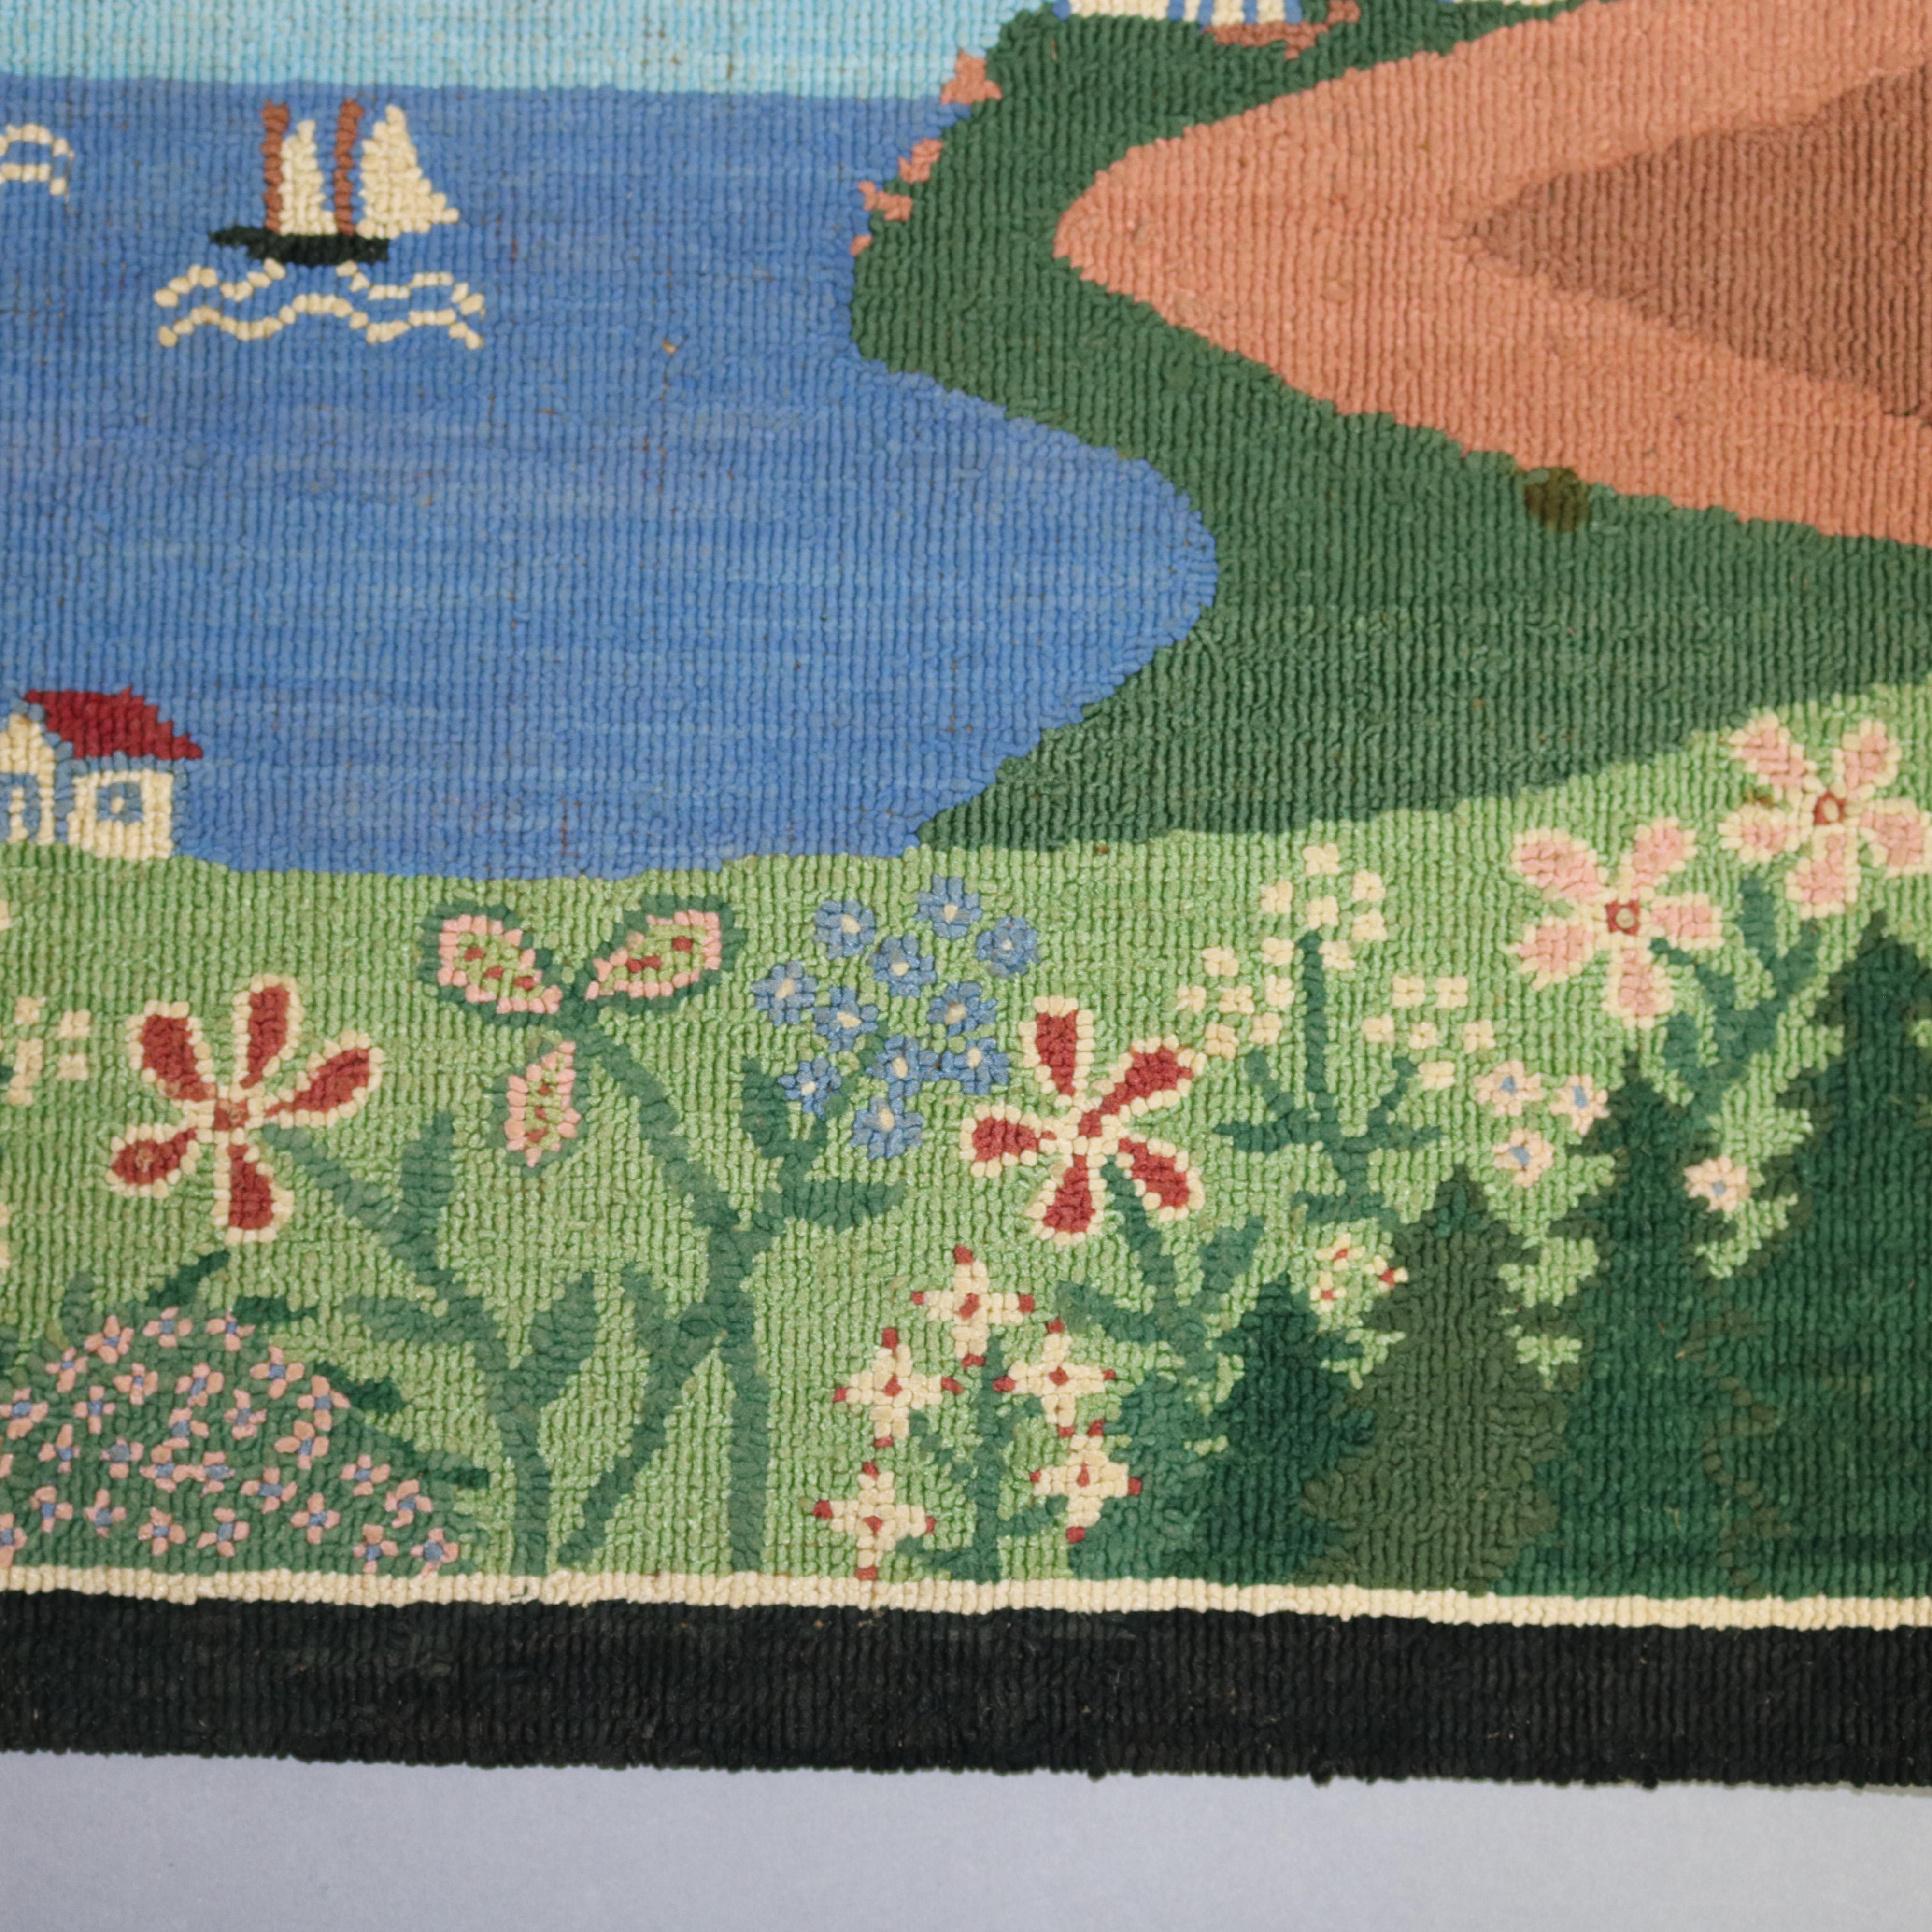 Hand-Crafted Vintage Newfoundland Grenfell Labrador Scenic Folk Art Hooked Area Rug, 20th C